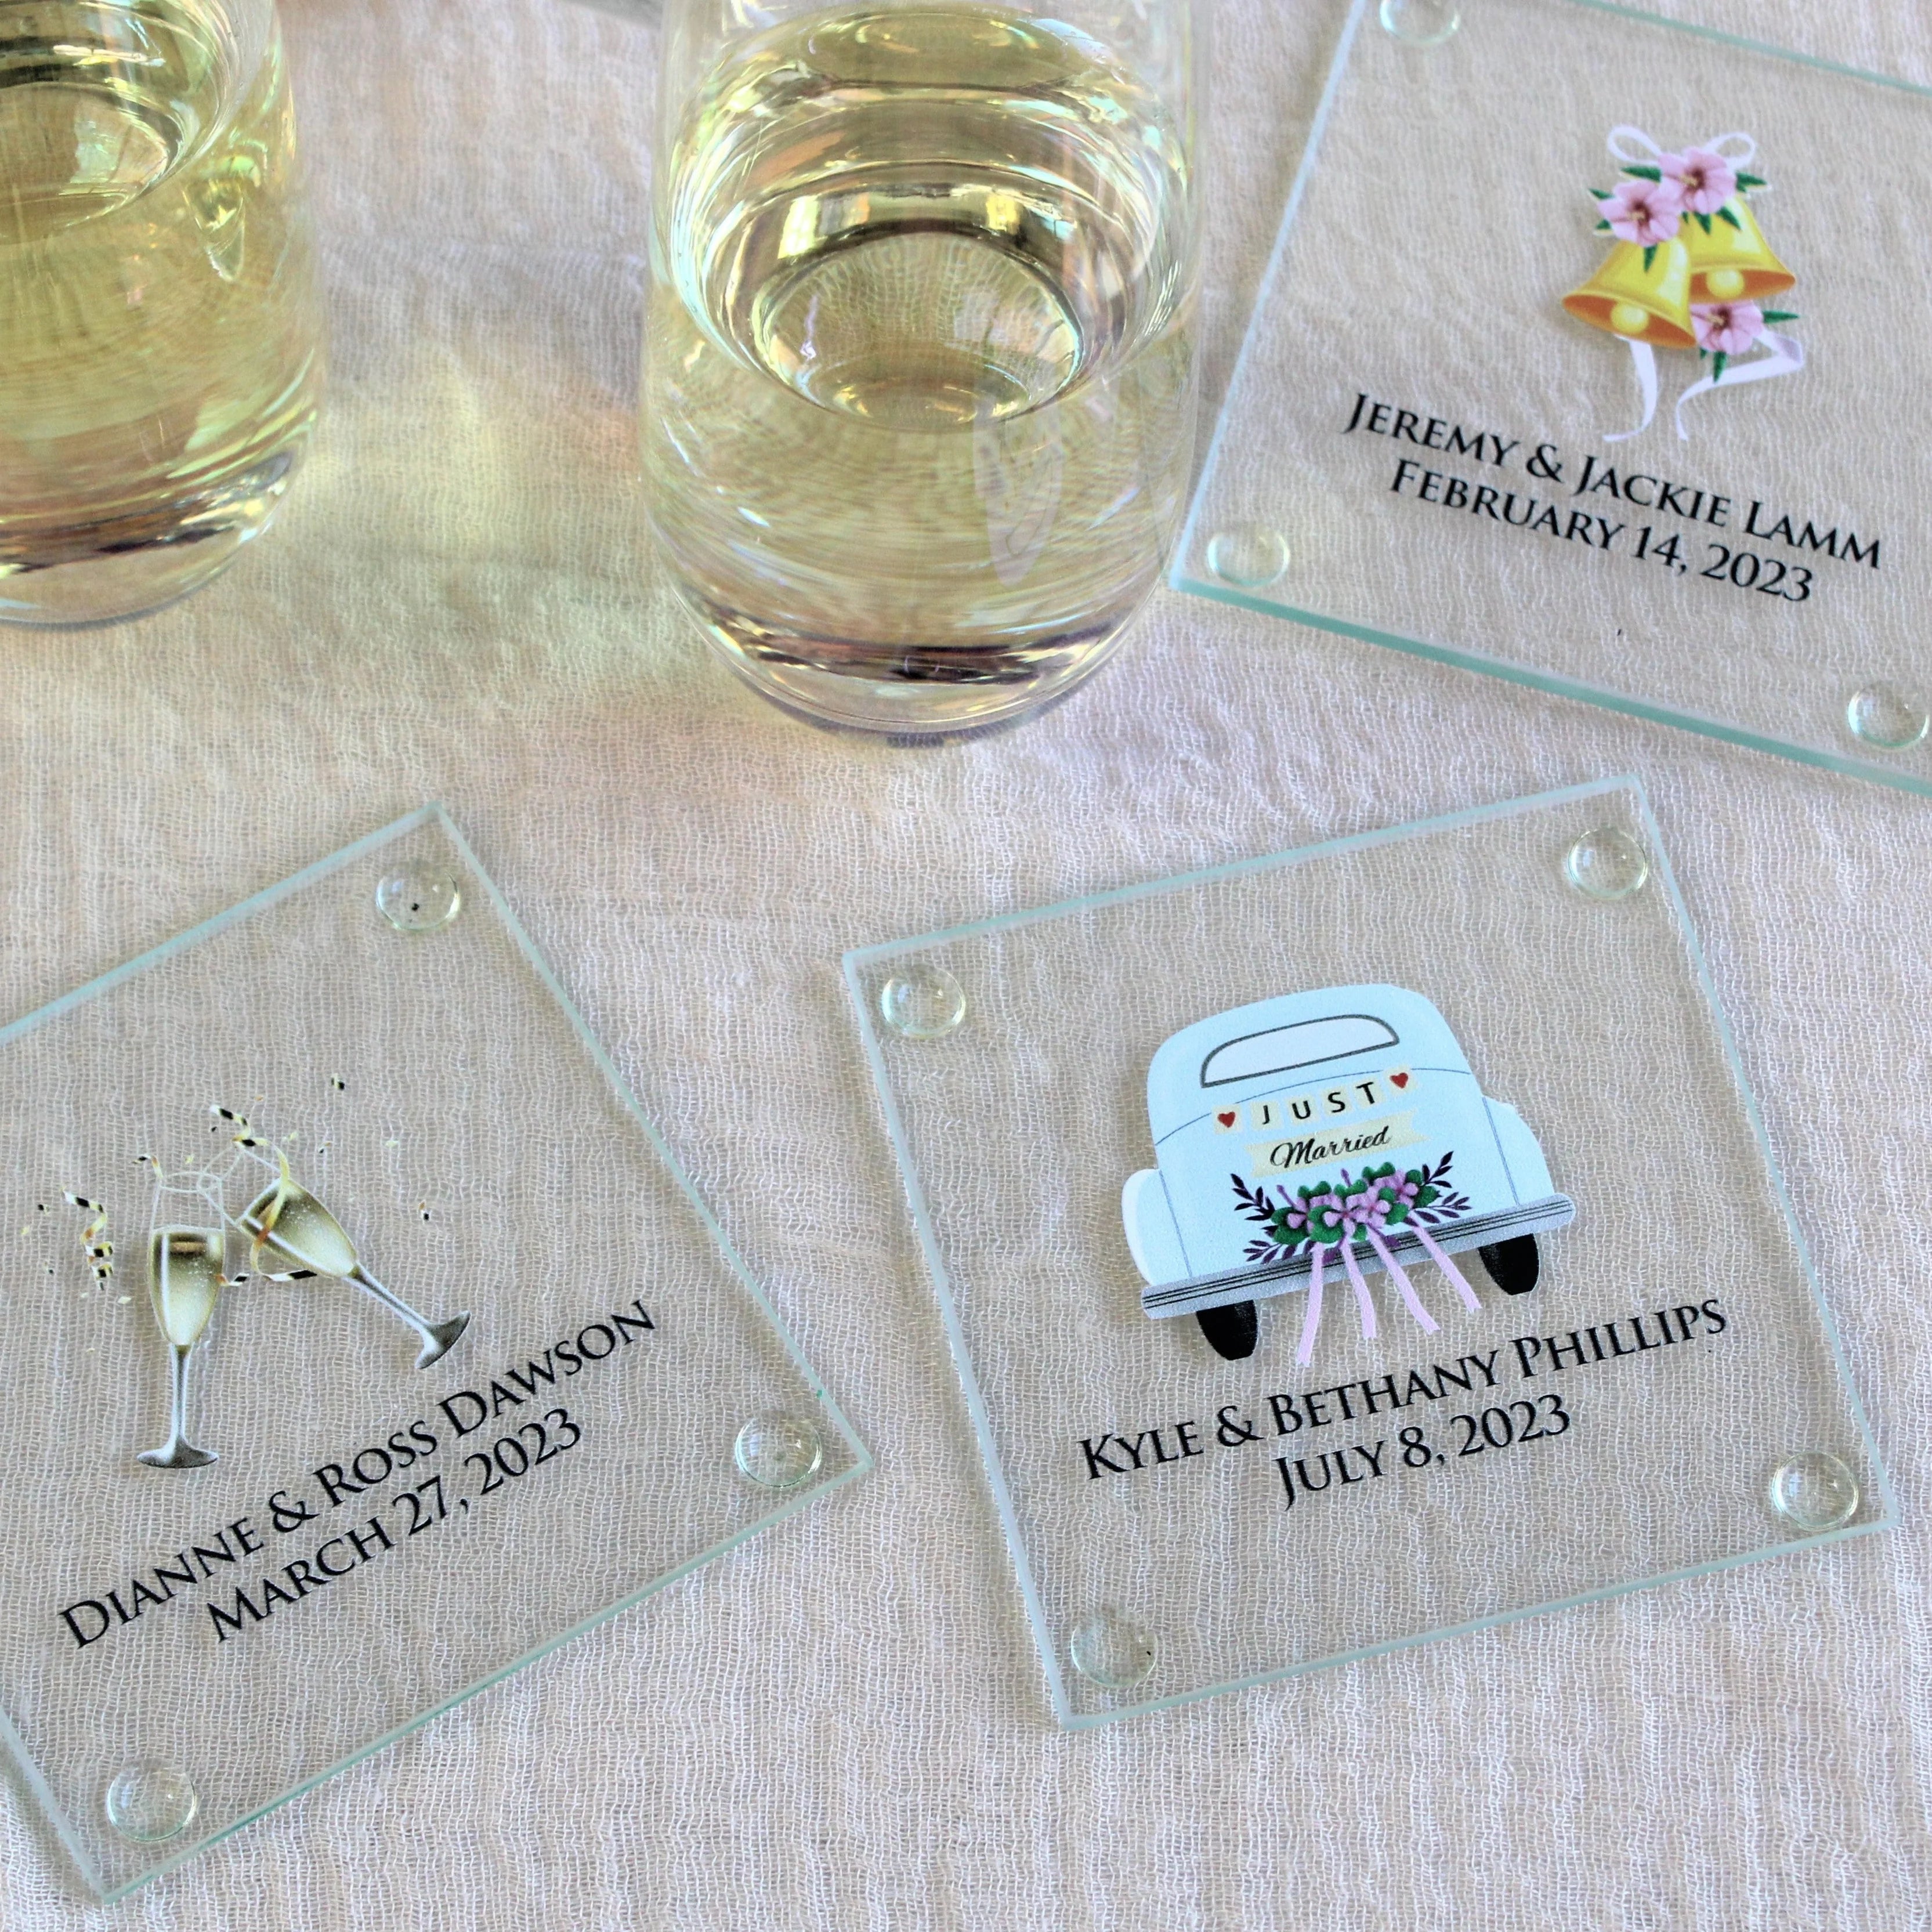 Custom personalized acrylic tumbler party favors for Bar and Bat Mitzvah